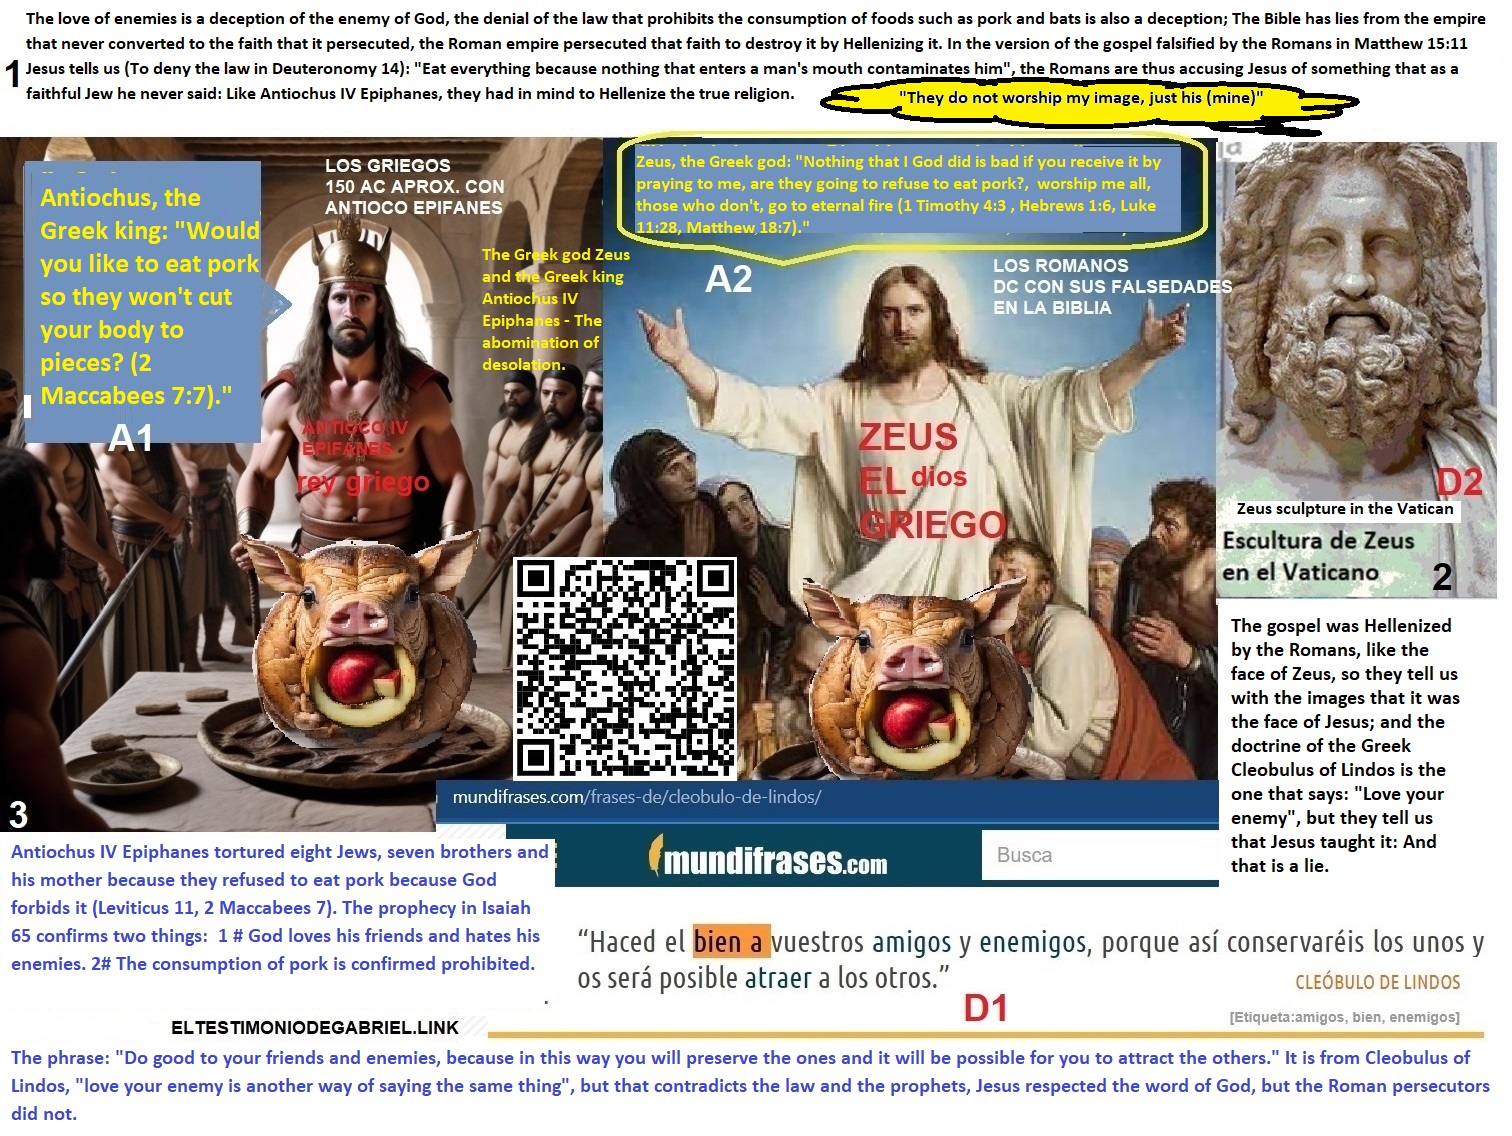 IDI02 The Greek god Zeus and the Greek king Antiochus IV Epiphanes - The abomination of desolation.